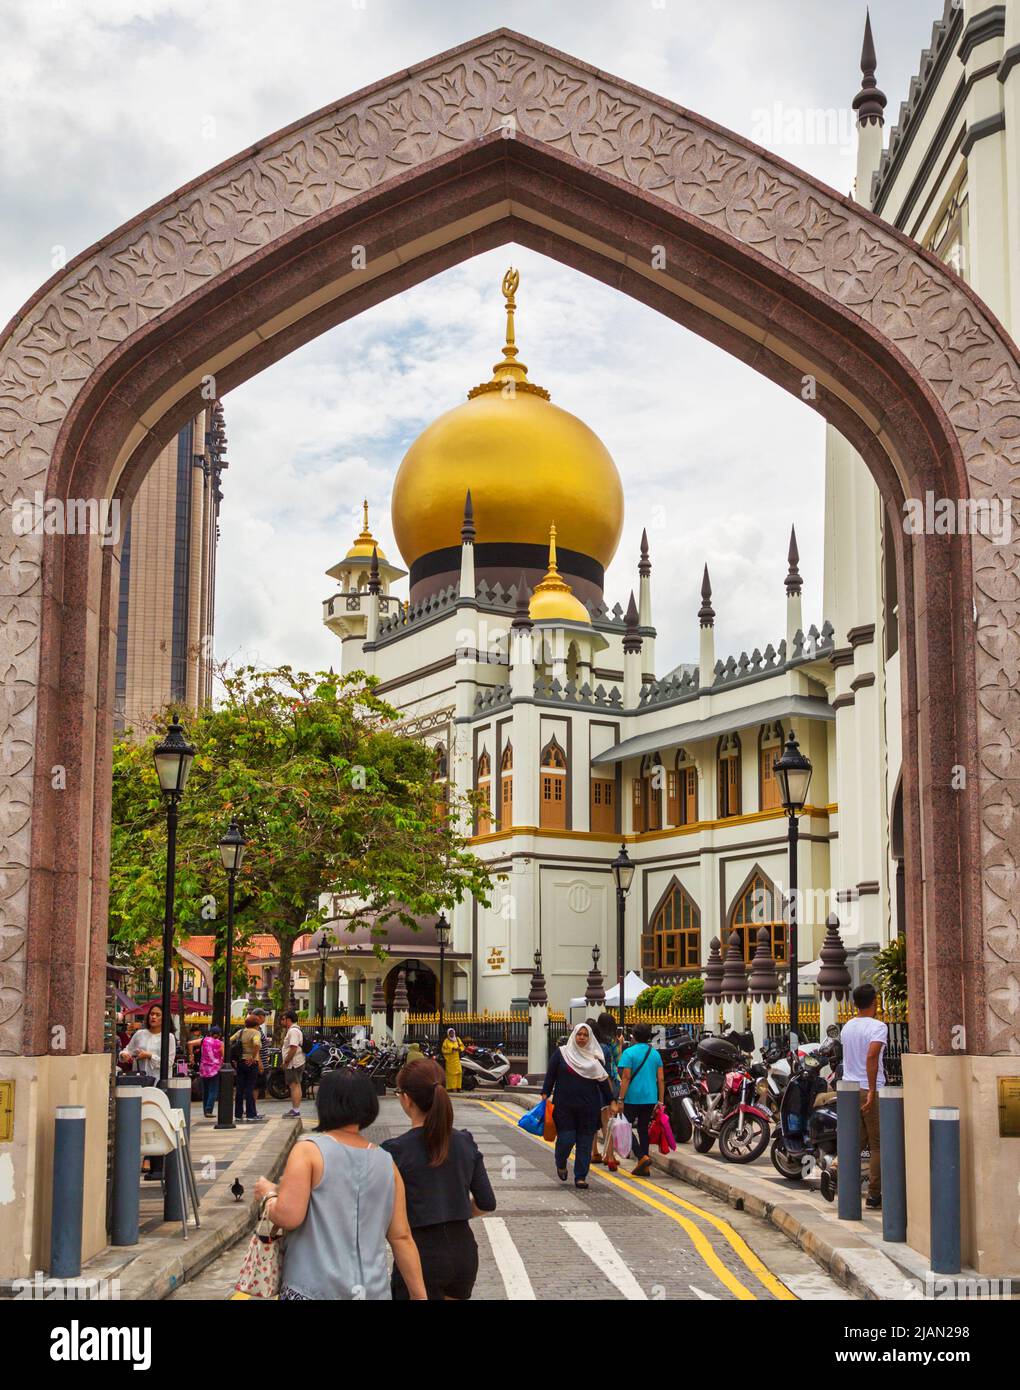 The Sultan Mosque, or Masjid Sultan, Republic of Singapore.  Sultan Mosque is the largest in Singapore and a national monument.  It was designed by Si Stock Photo